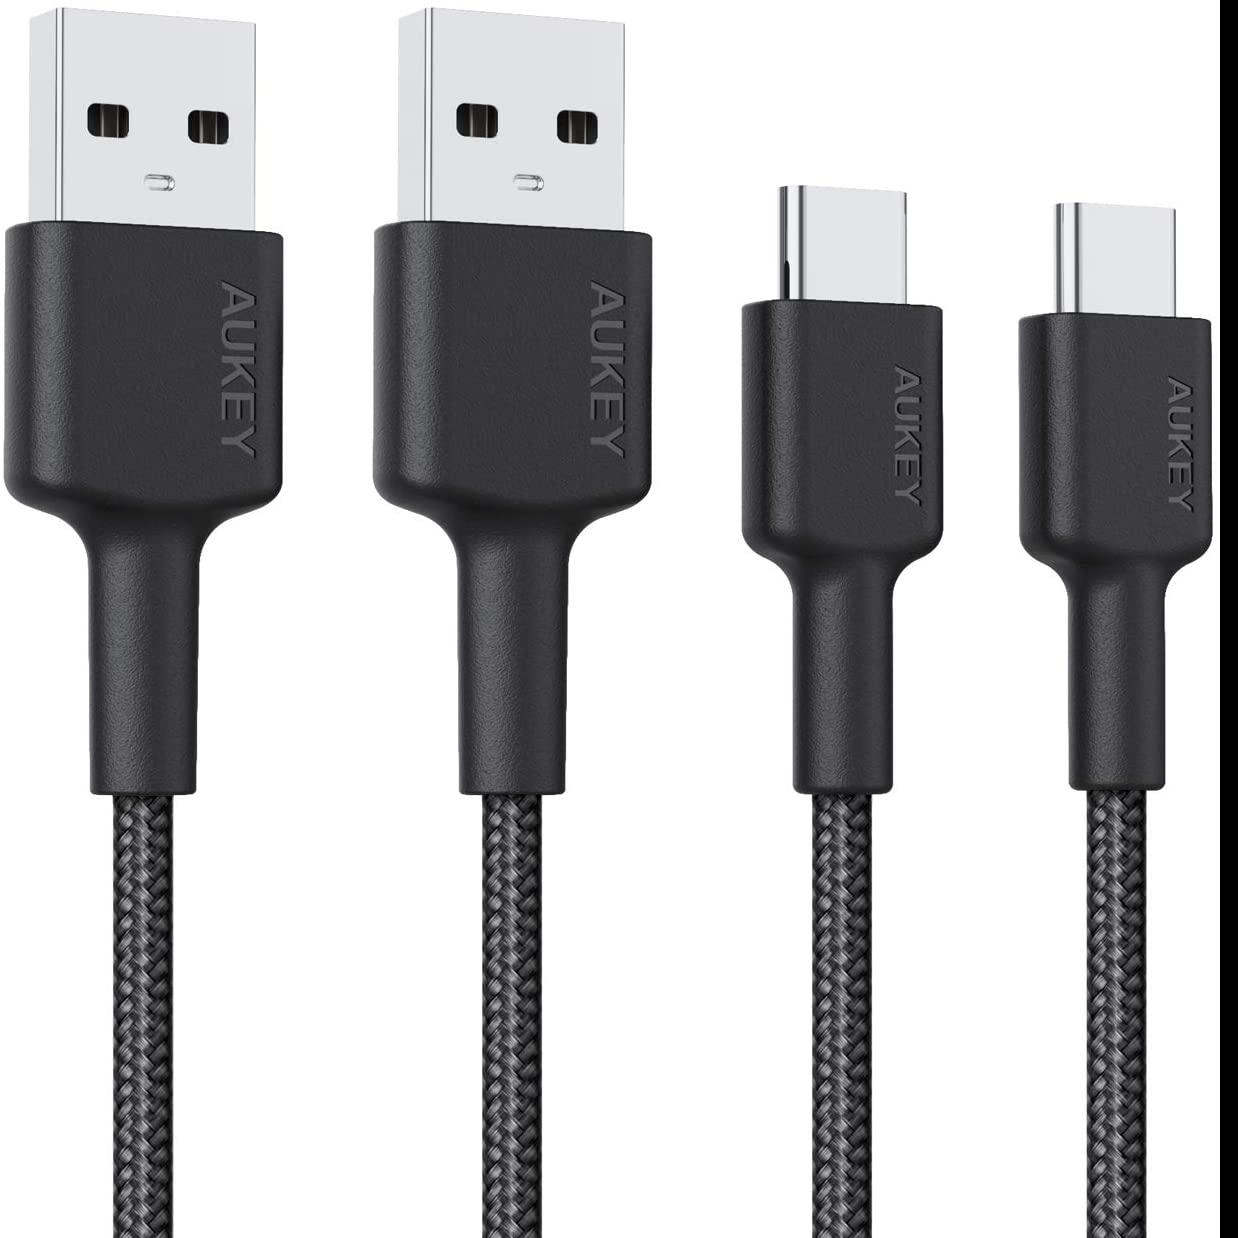 2 Aukey 6ft Nylon USB-C to USB A Charge and Data Cables for $4.15